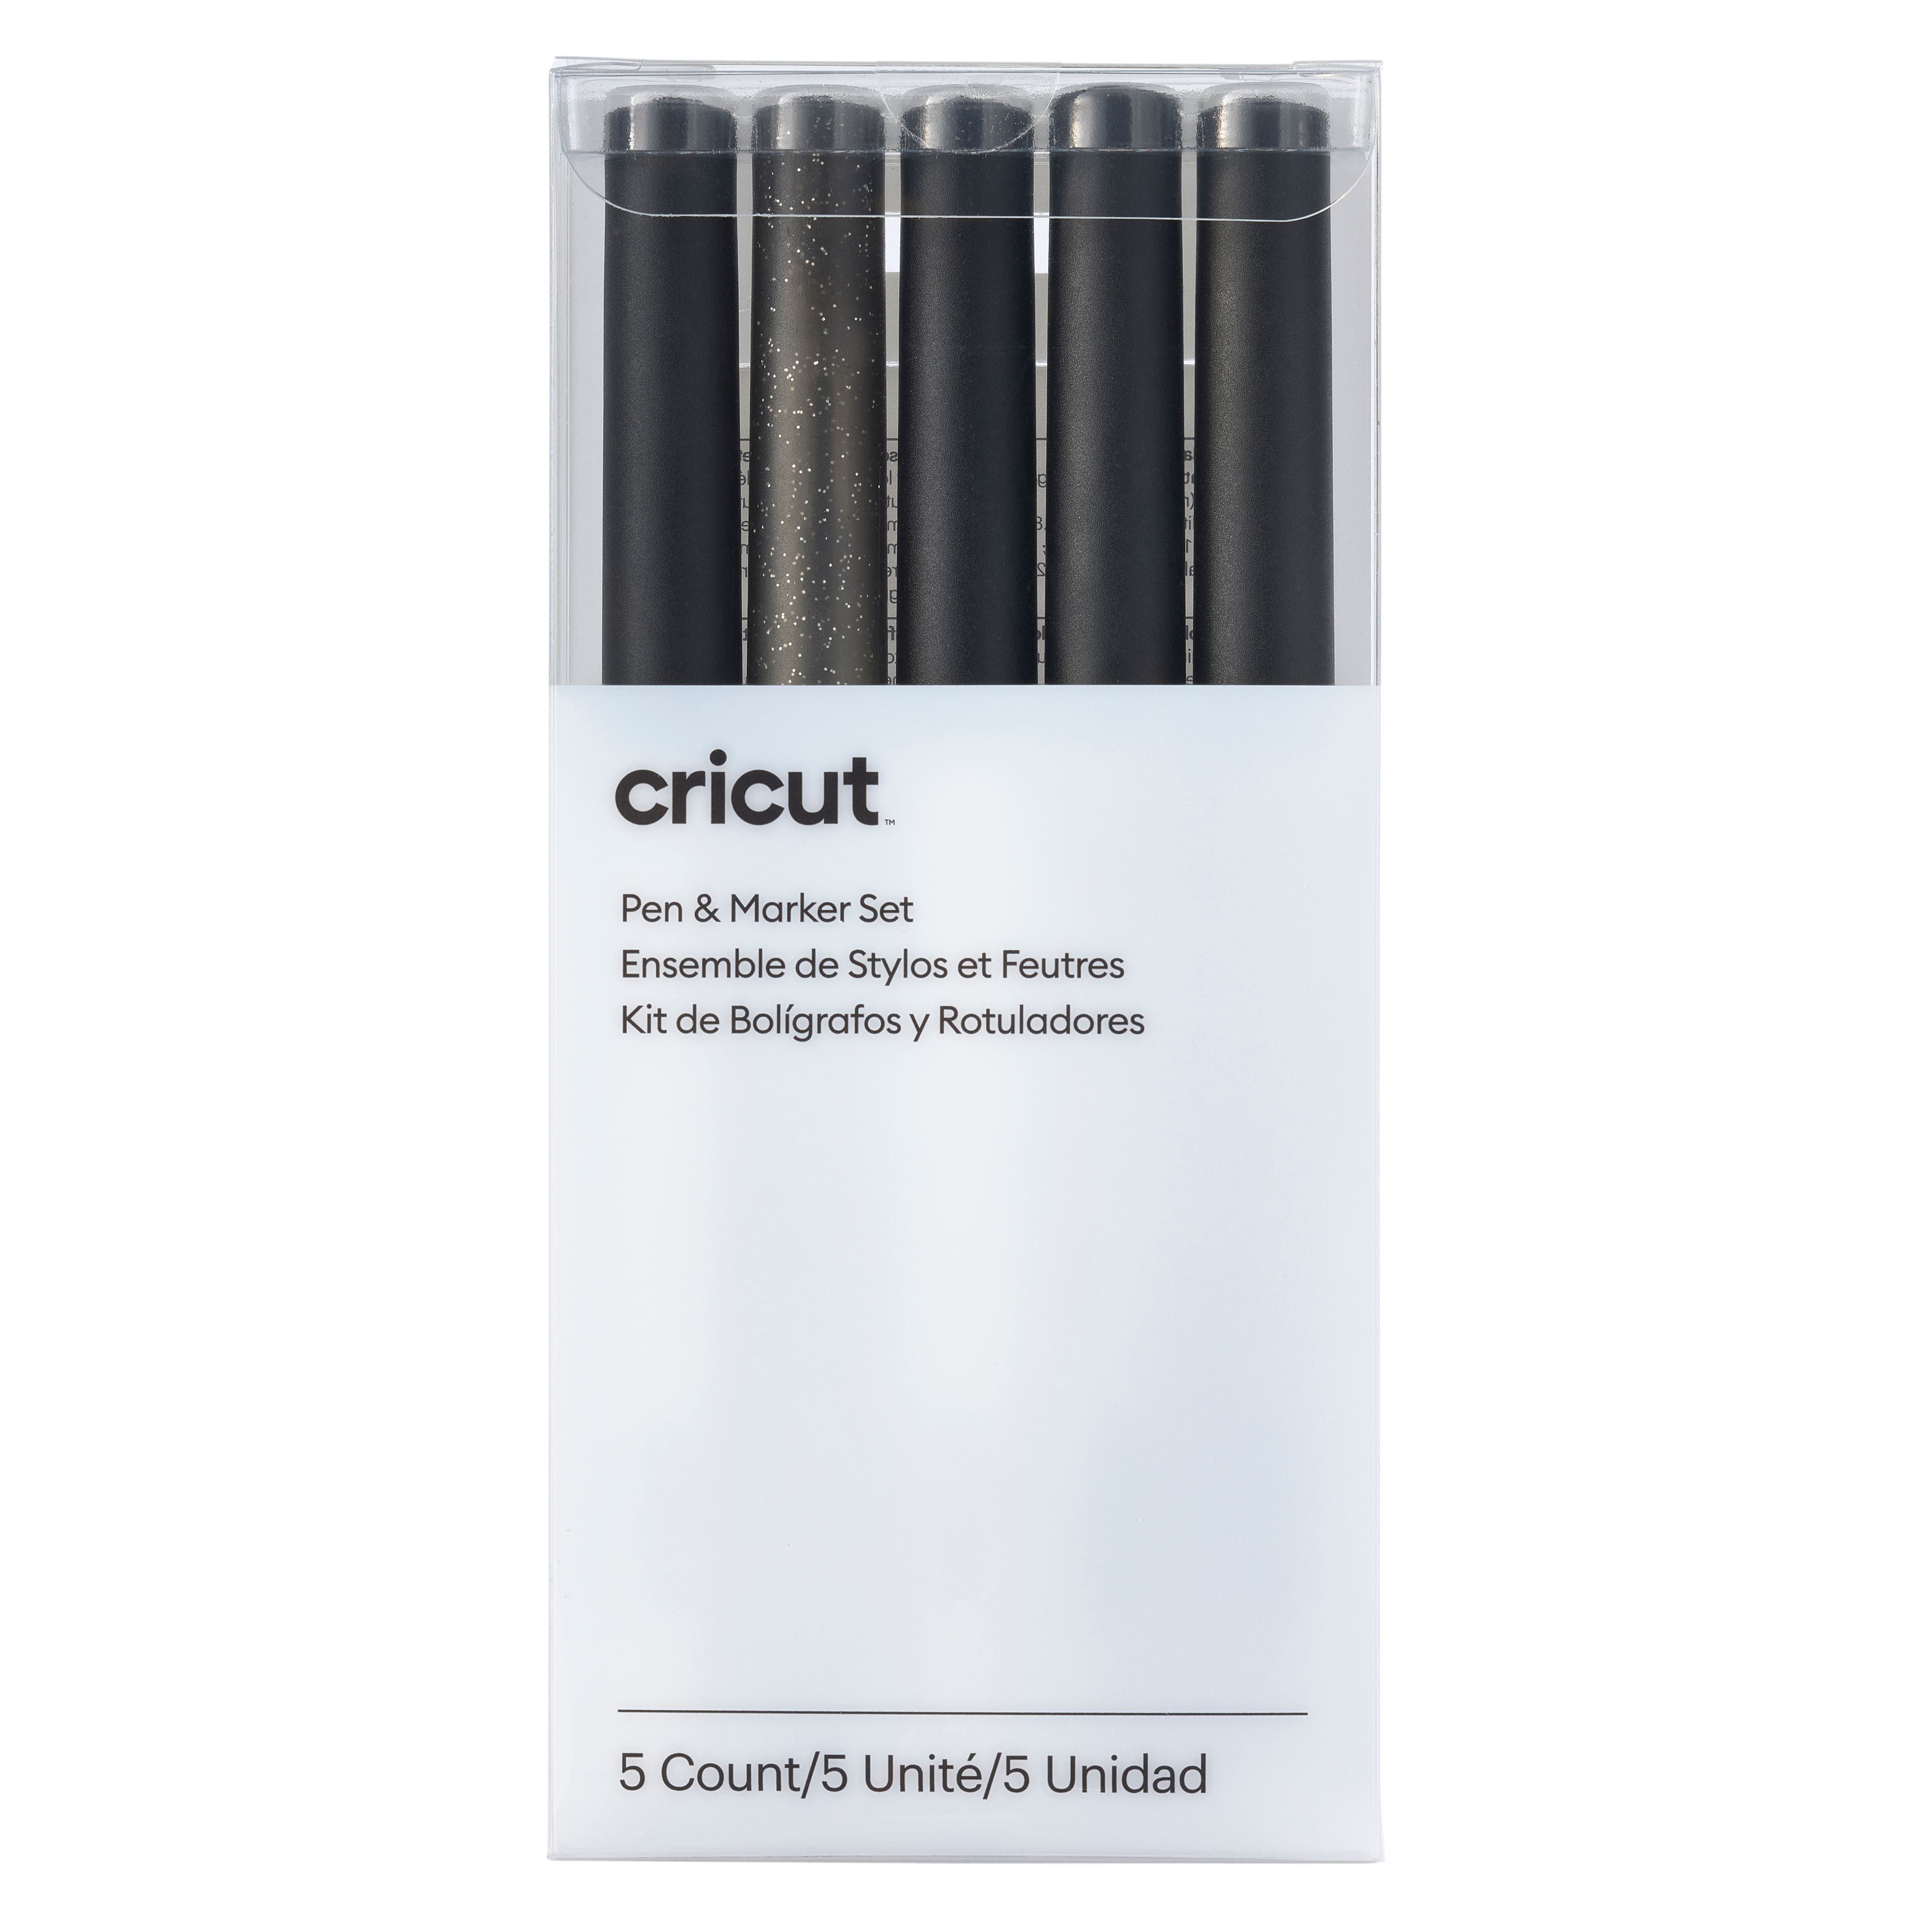 Pack of 5 Cricut metallic Pens 1.0 for Maker and Explore